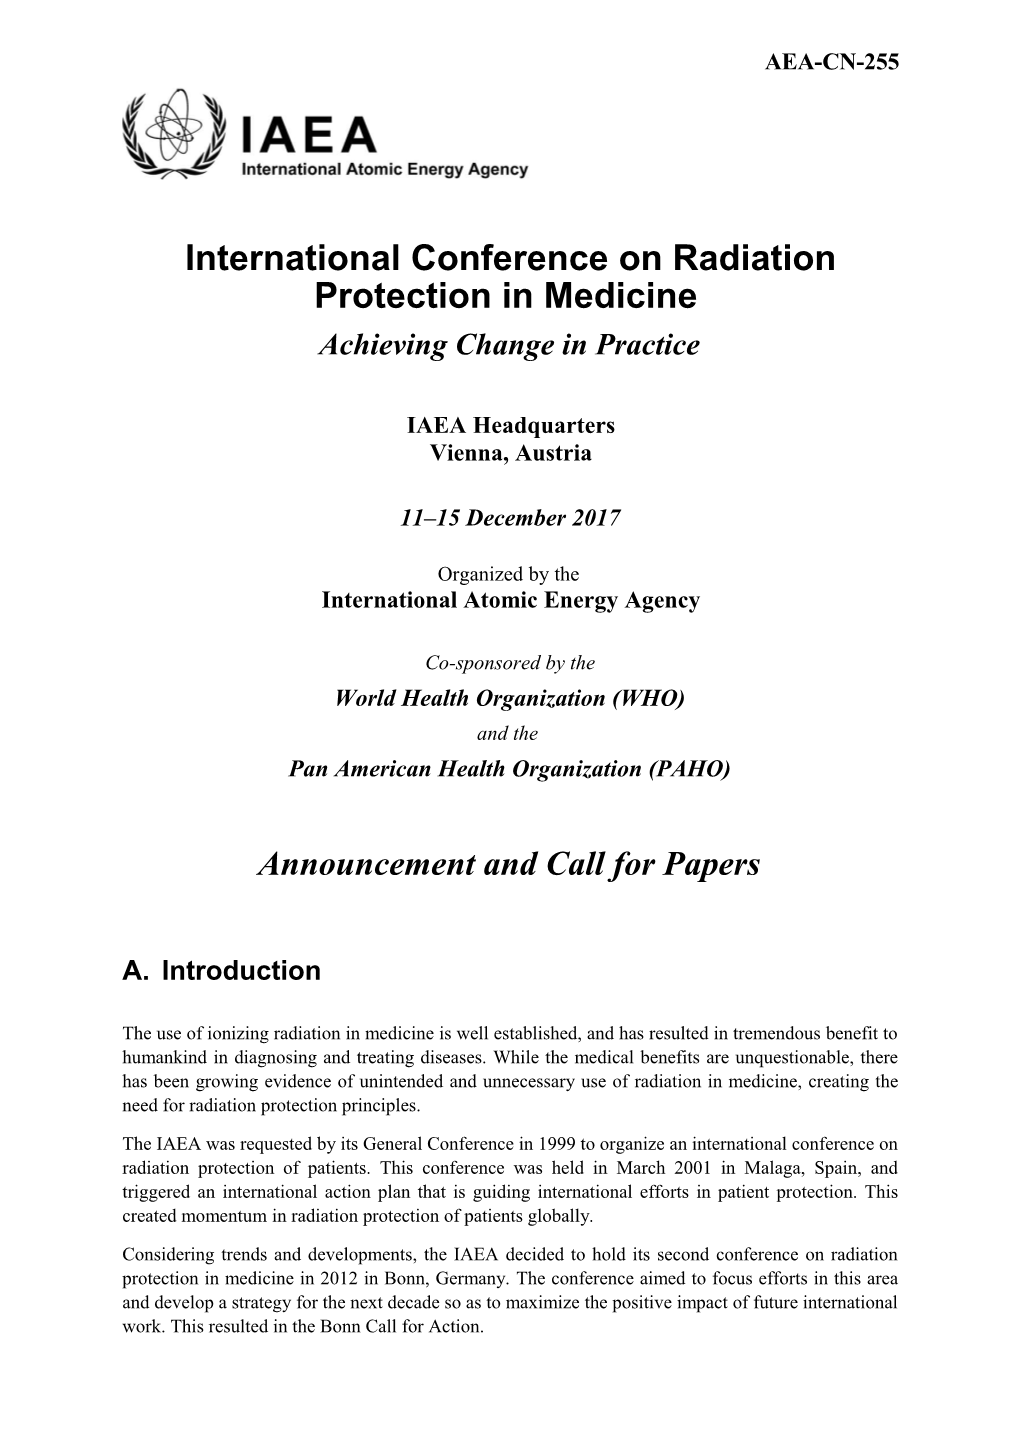 International Conference on Radiation Protection in Medicine